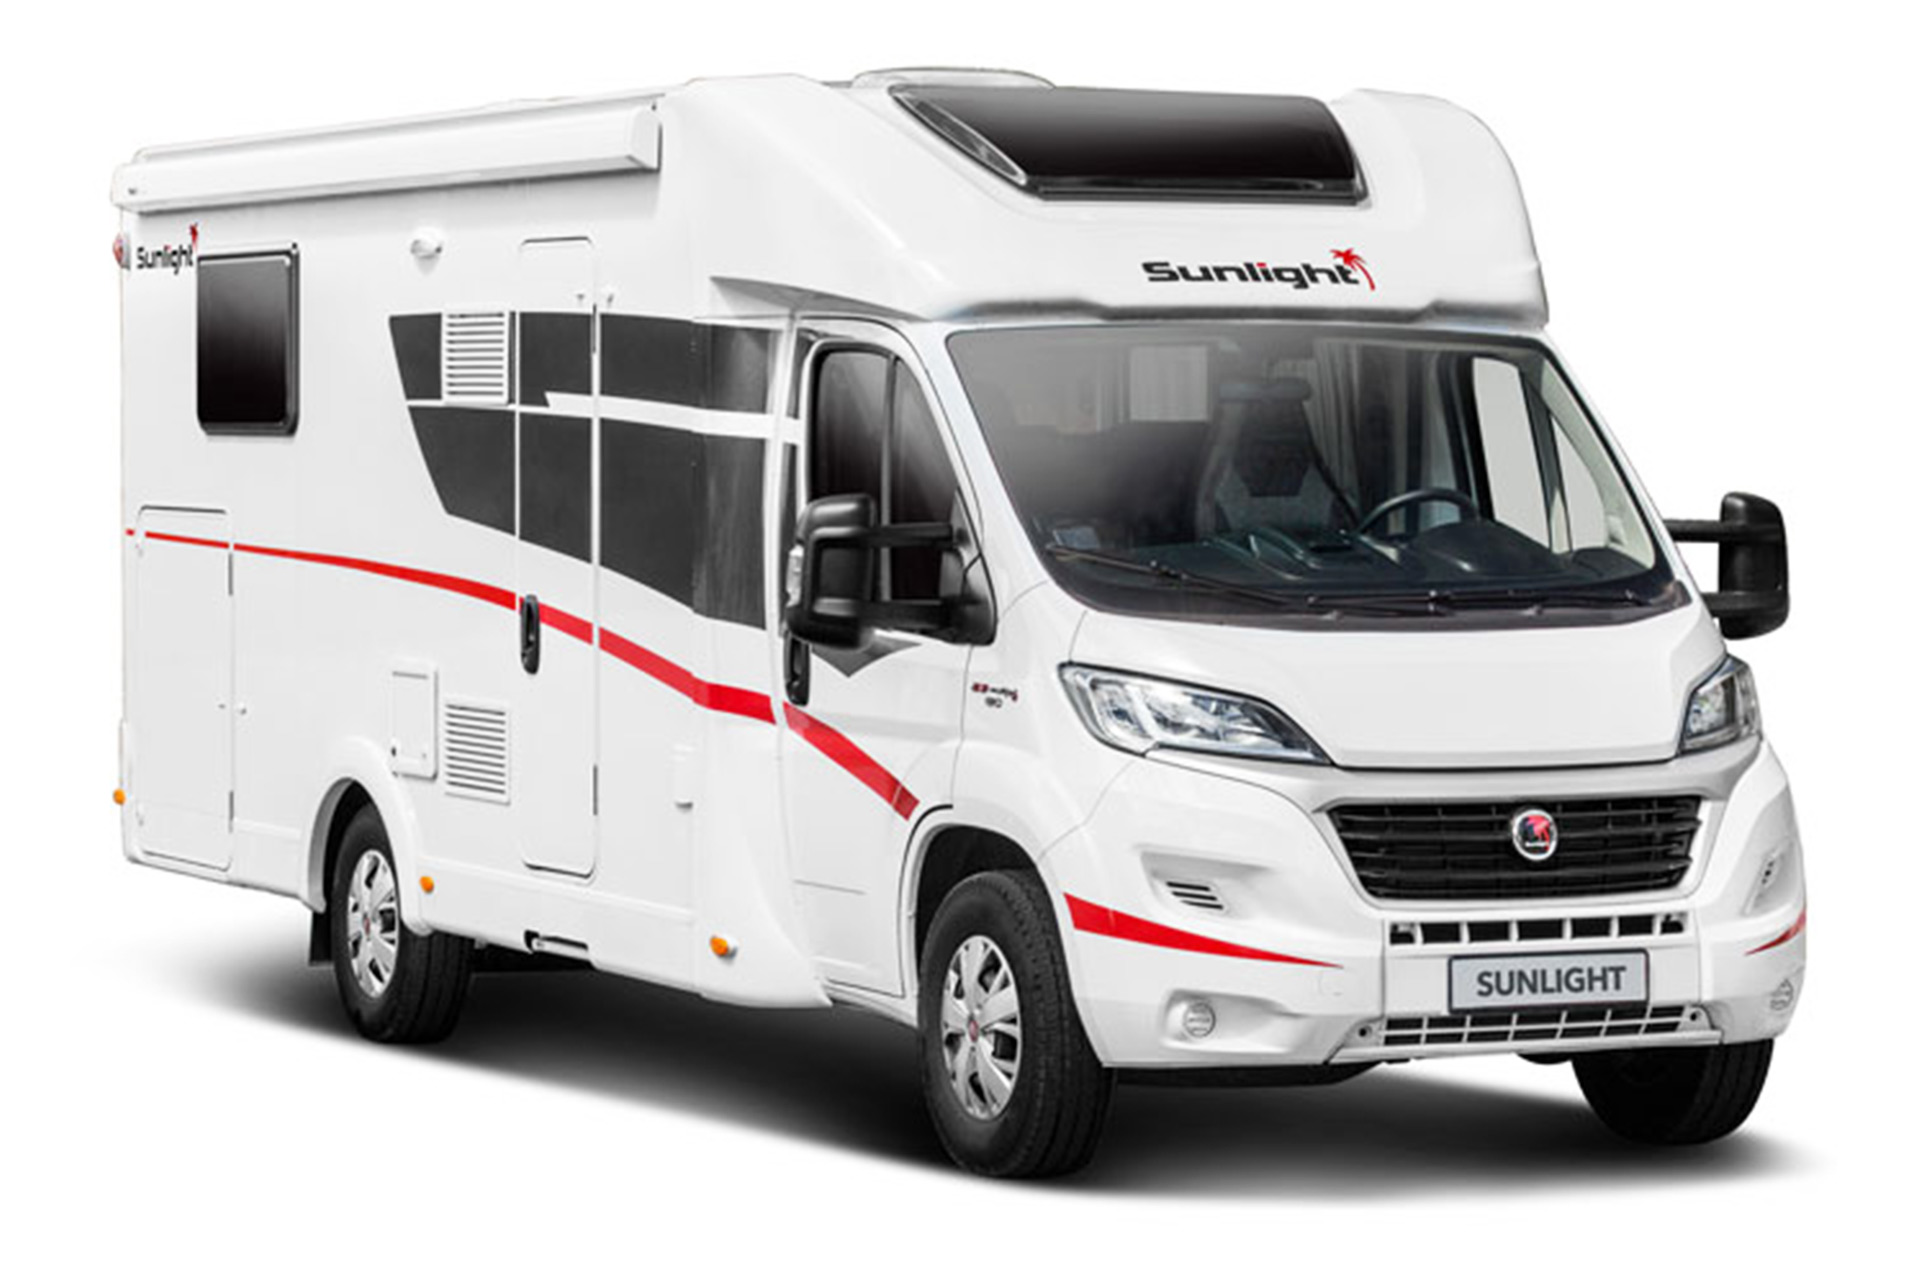 FIAT DUCATO Wohnmobil-Chassis mit Vollausstattung